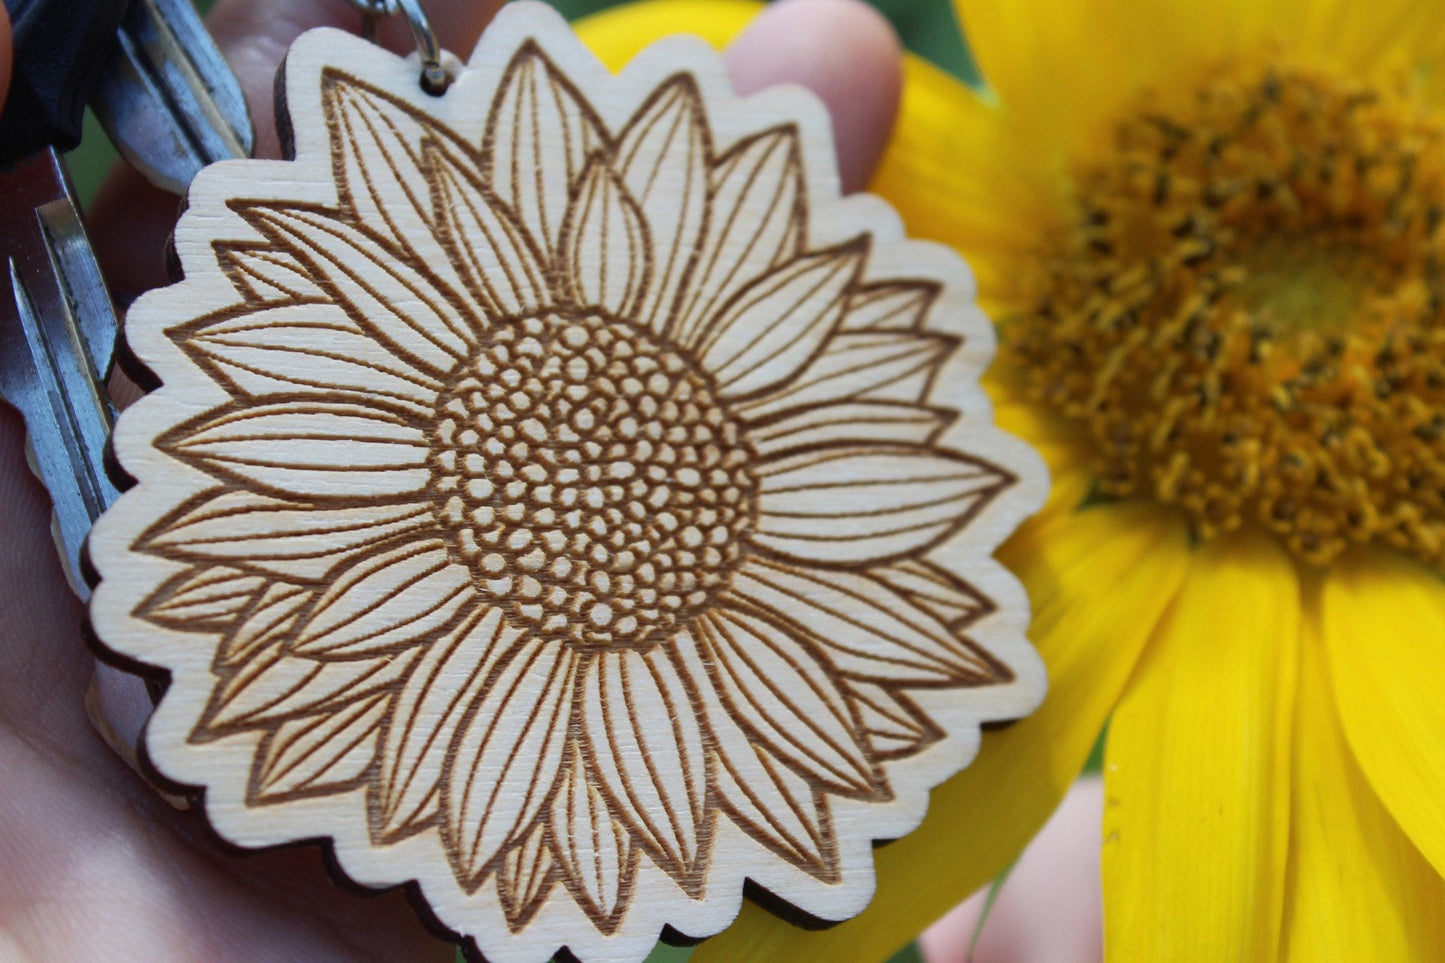 Cute Sunflower Wooden Keychain Gift For Her, Cute Natural Wood Sunflower Sustainable Garden Gift For Her